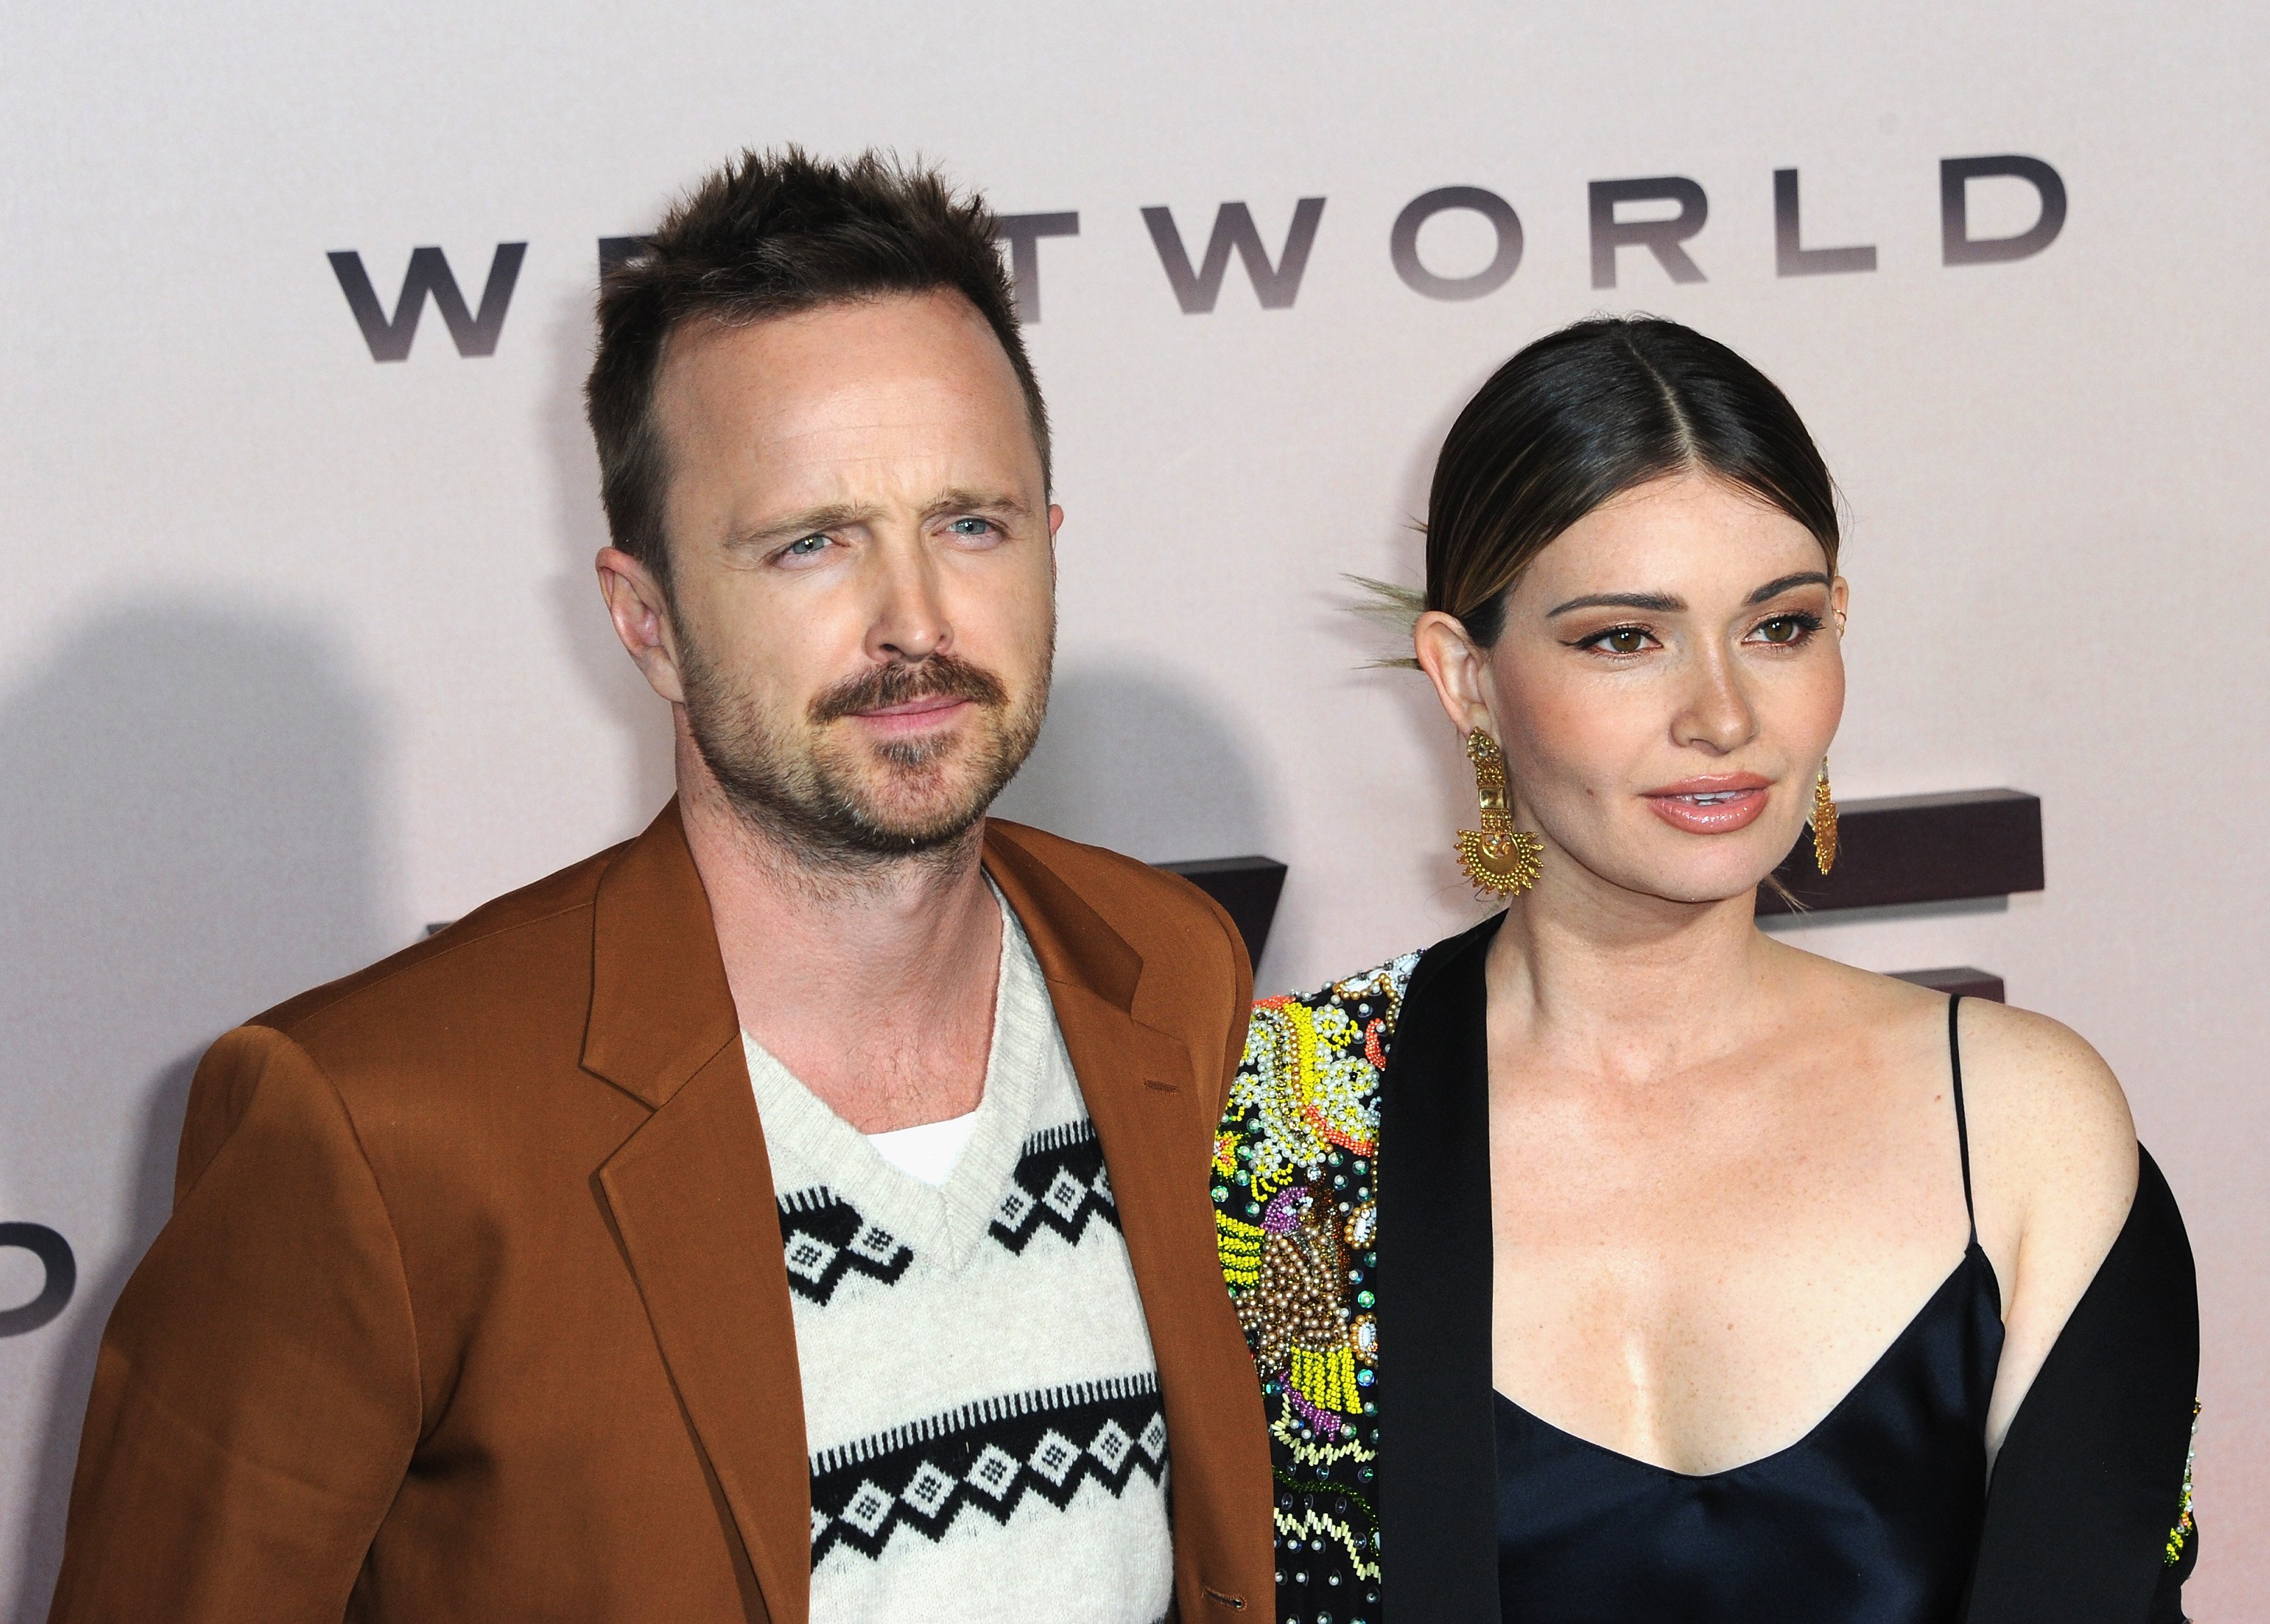 Aaron Paul and Lauren Parsekian attend the Premiere Of HBO's "Westworld" Season 3 held at TCL Chinese Theatre on March 5, 2020, in Hollywood, California. | Source: Getty Images